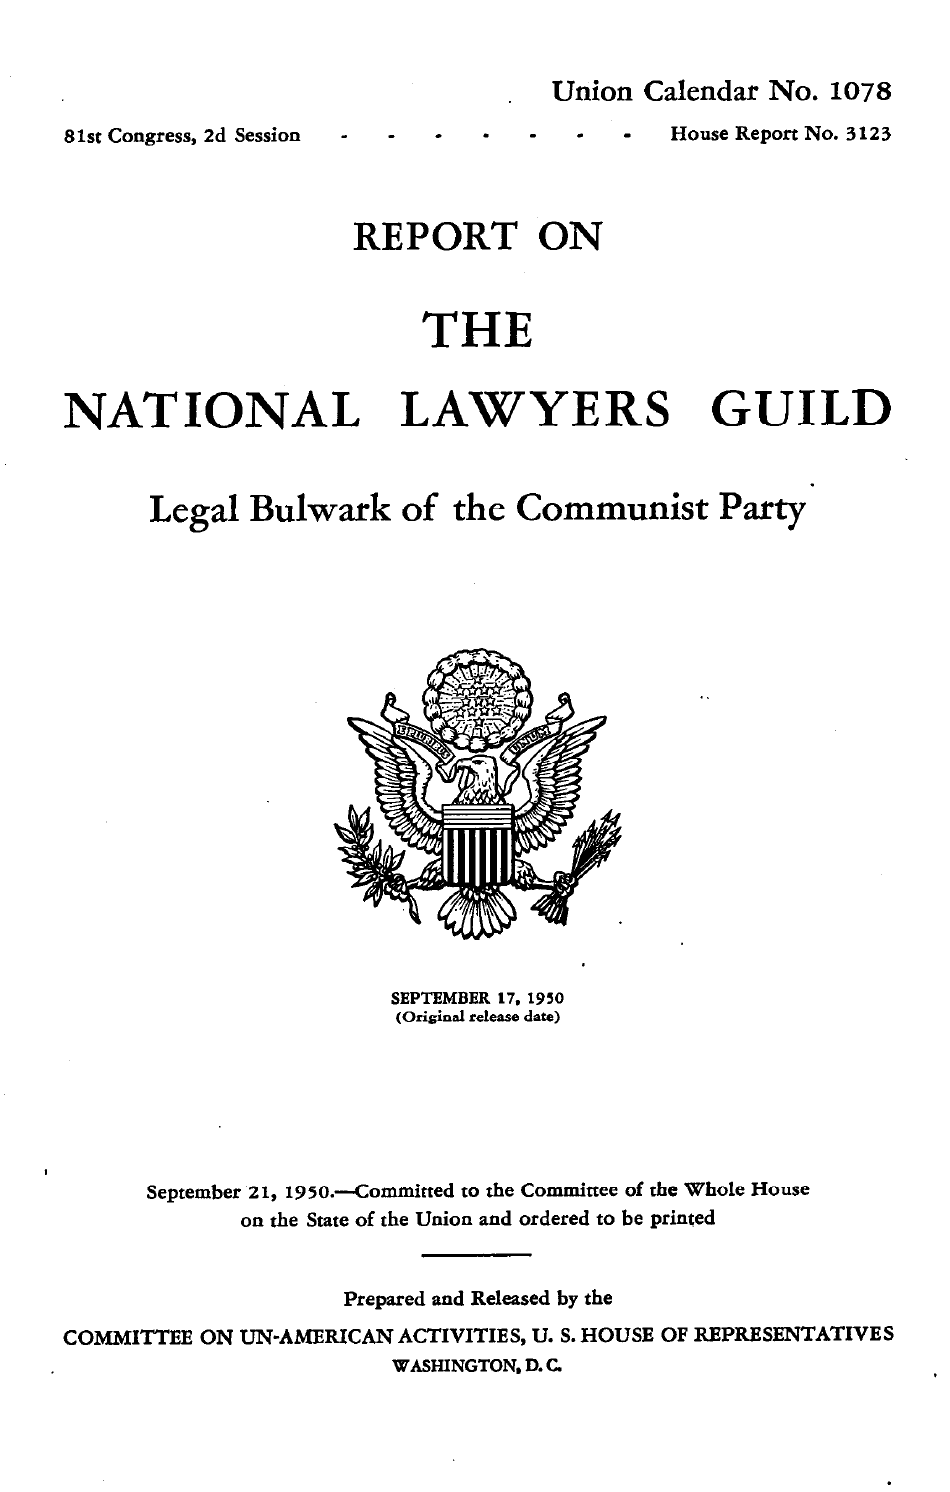 Report on the National Lawyers Guild - Legal Bulwark of the Communist Party, Page 1